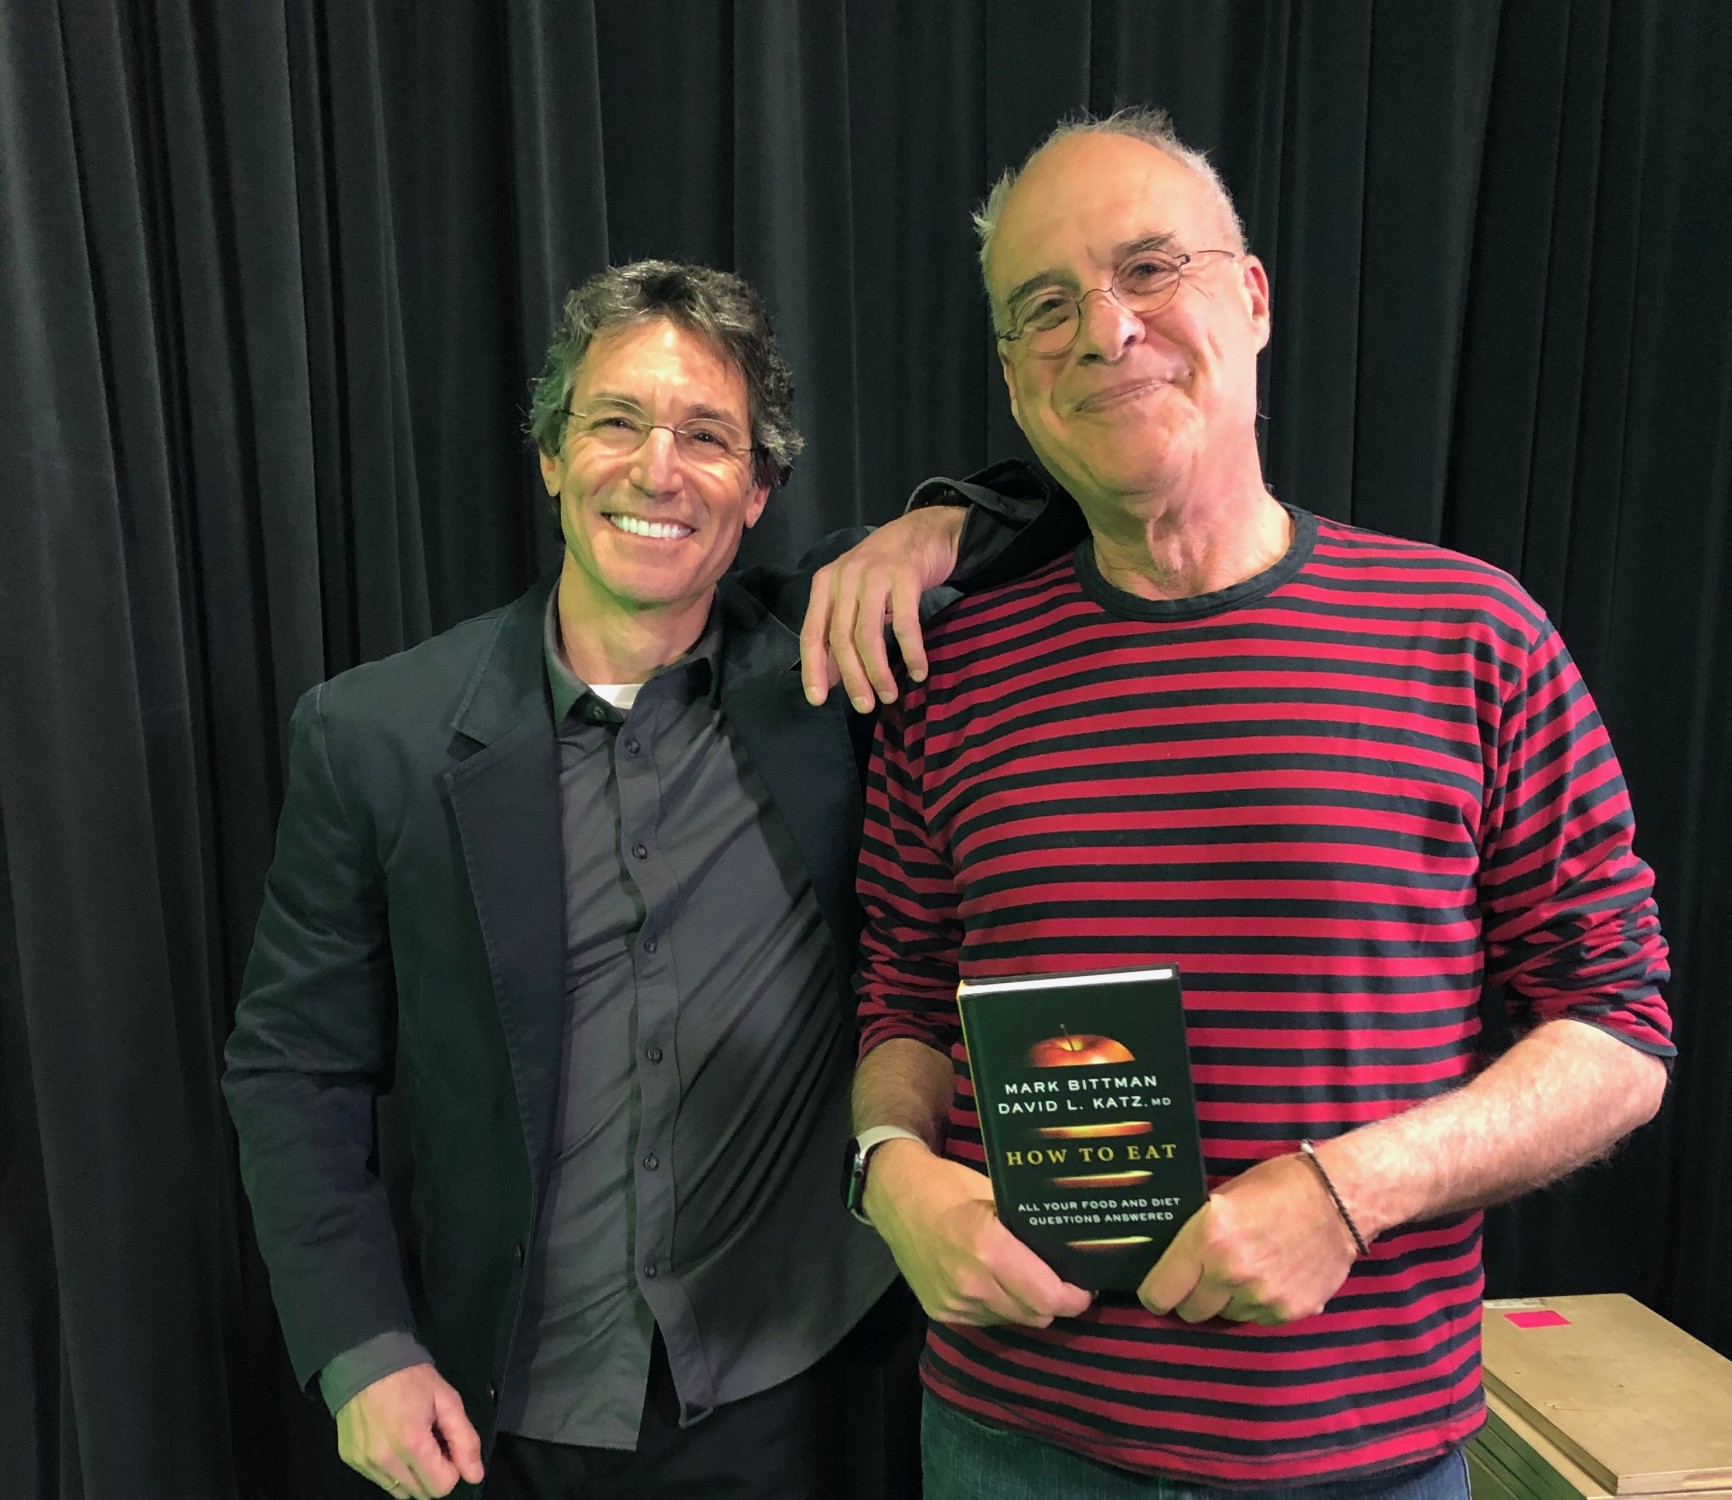 David L Katz MD on left and Mark Bittman on righ, holding a copy oof their new book, "How to Eat: All Your Food and Diet Questions Answered."